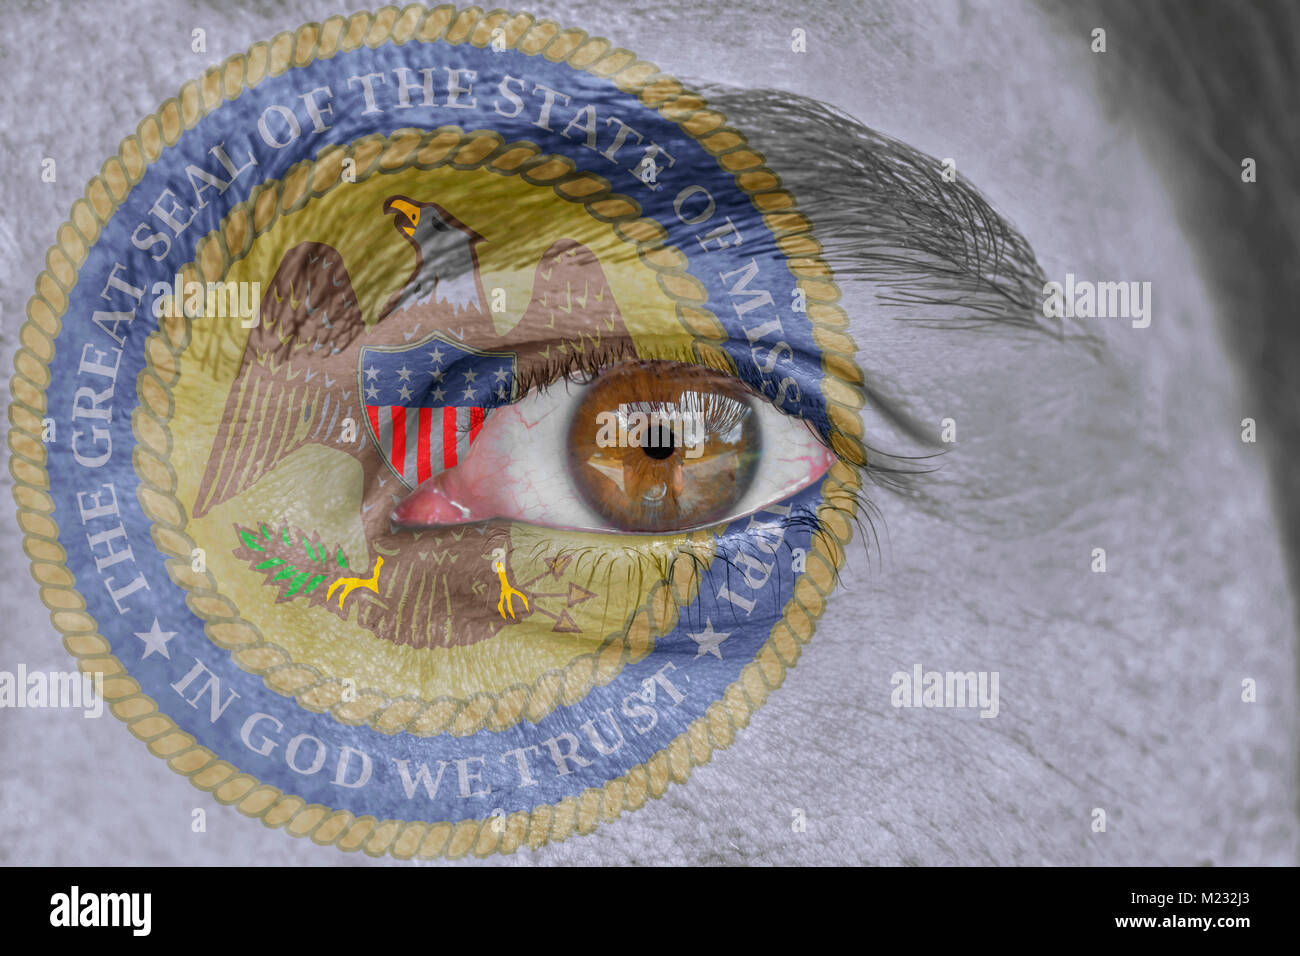 Human face and eye painted with US state seal flag of Mississippi Stock Photo